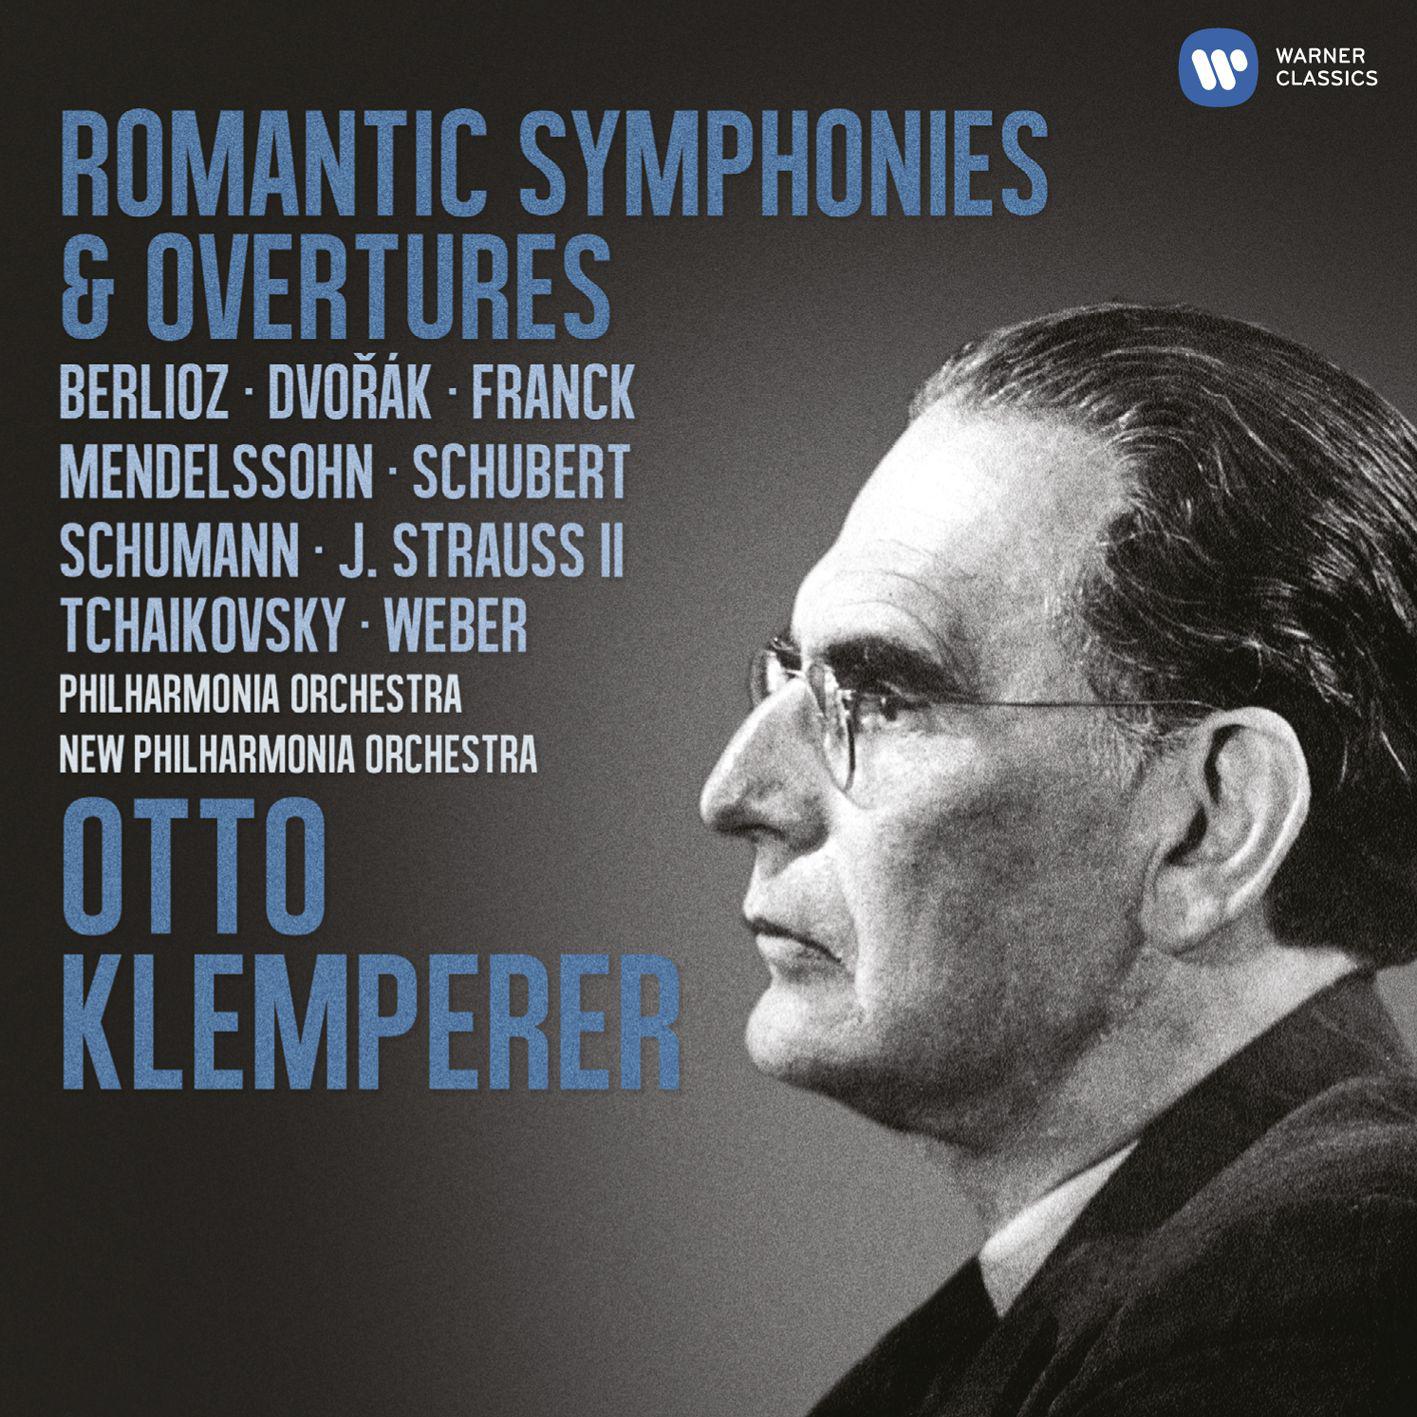 Symphony No. 3 in A Minor, Op. 56, MWV N18 "Scottish":II. Vivace non troppo